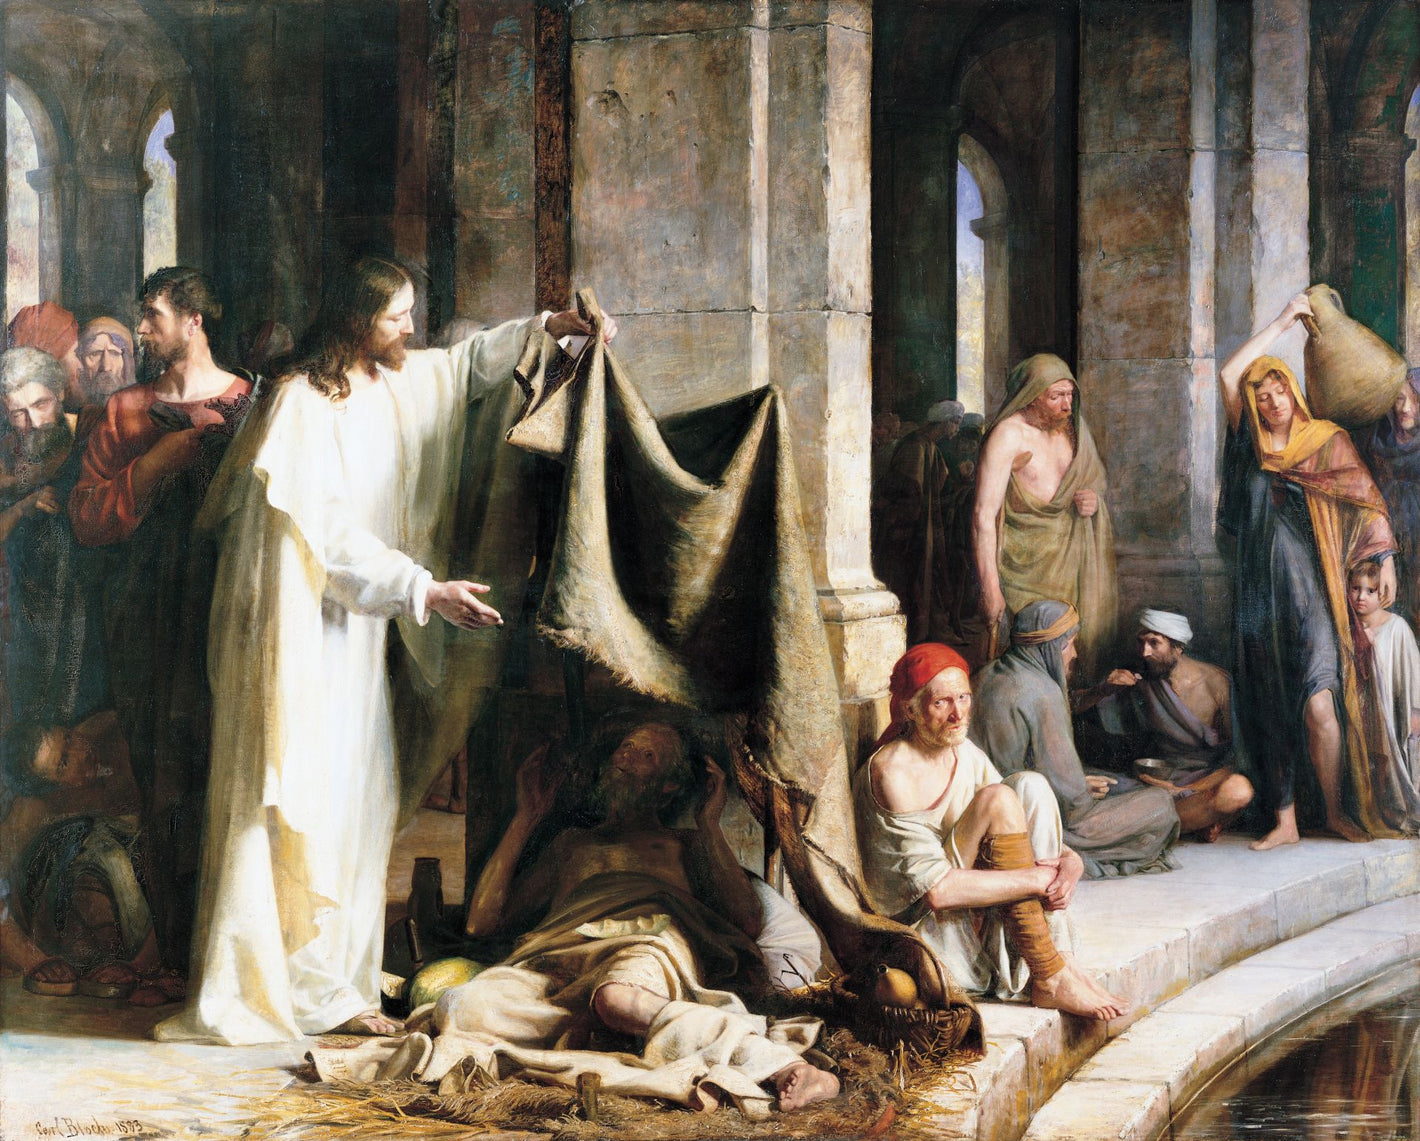 Christ healing the paralytic at the pool of Bethesda